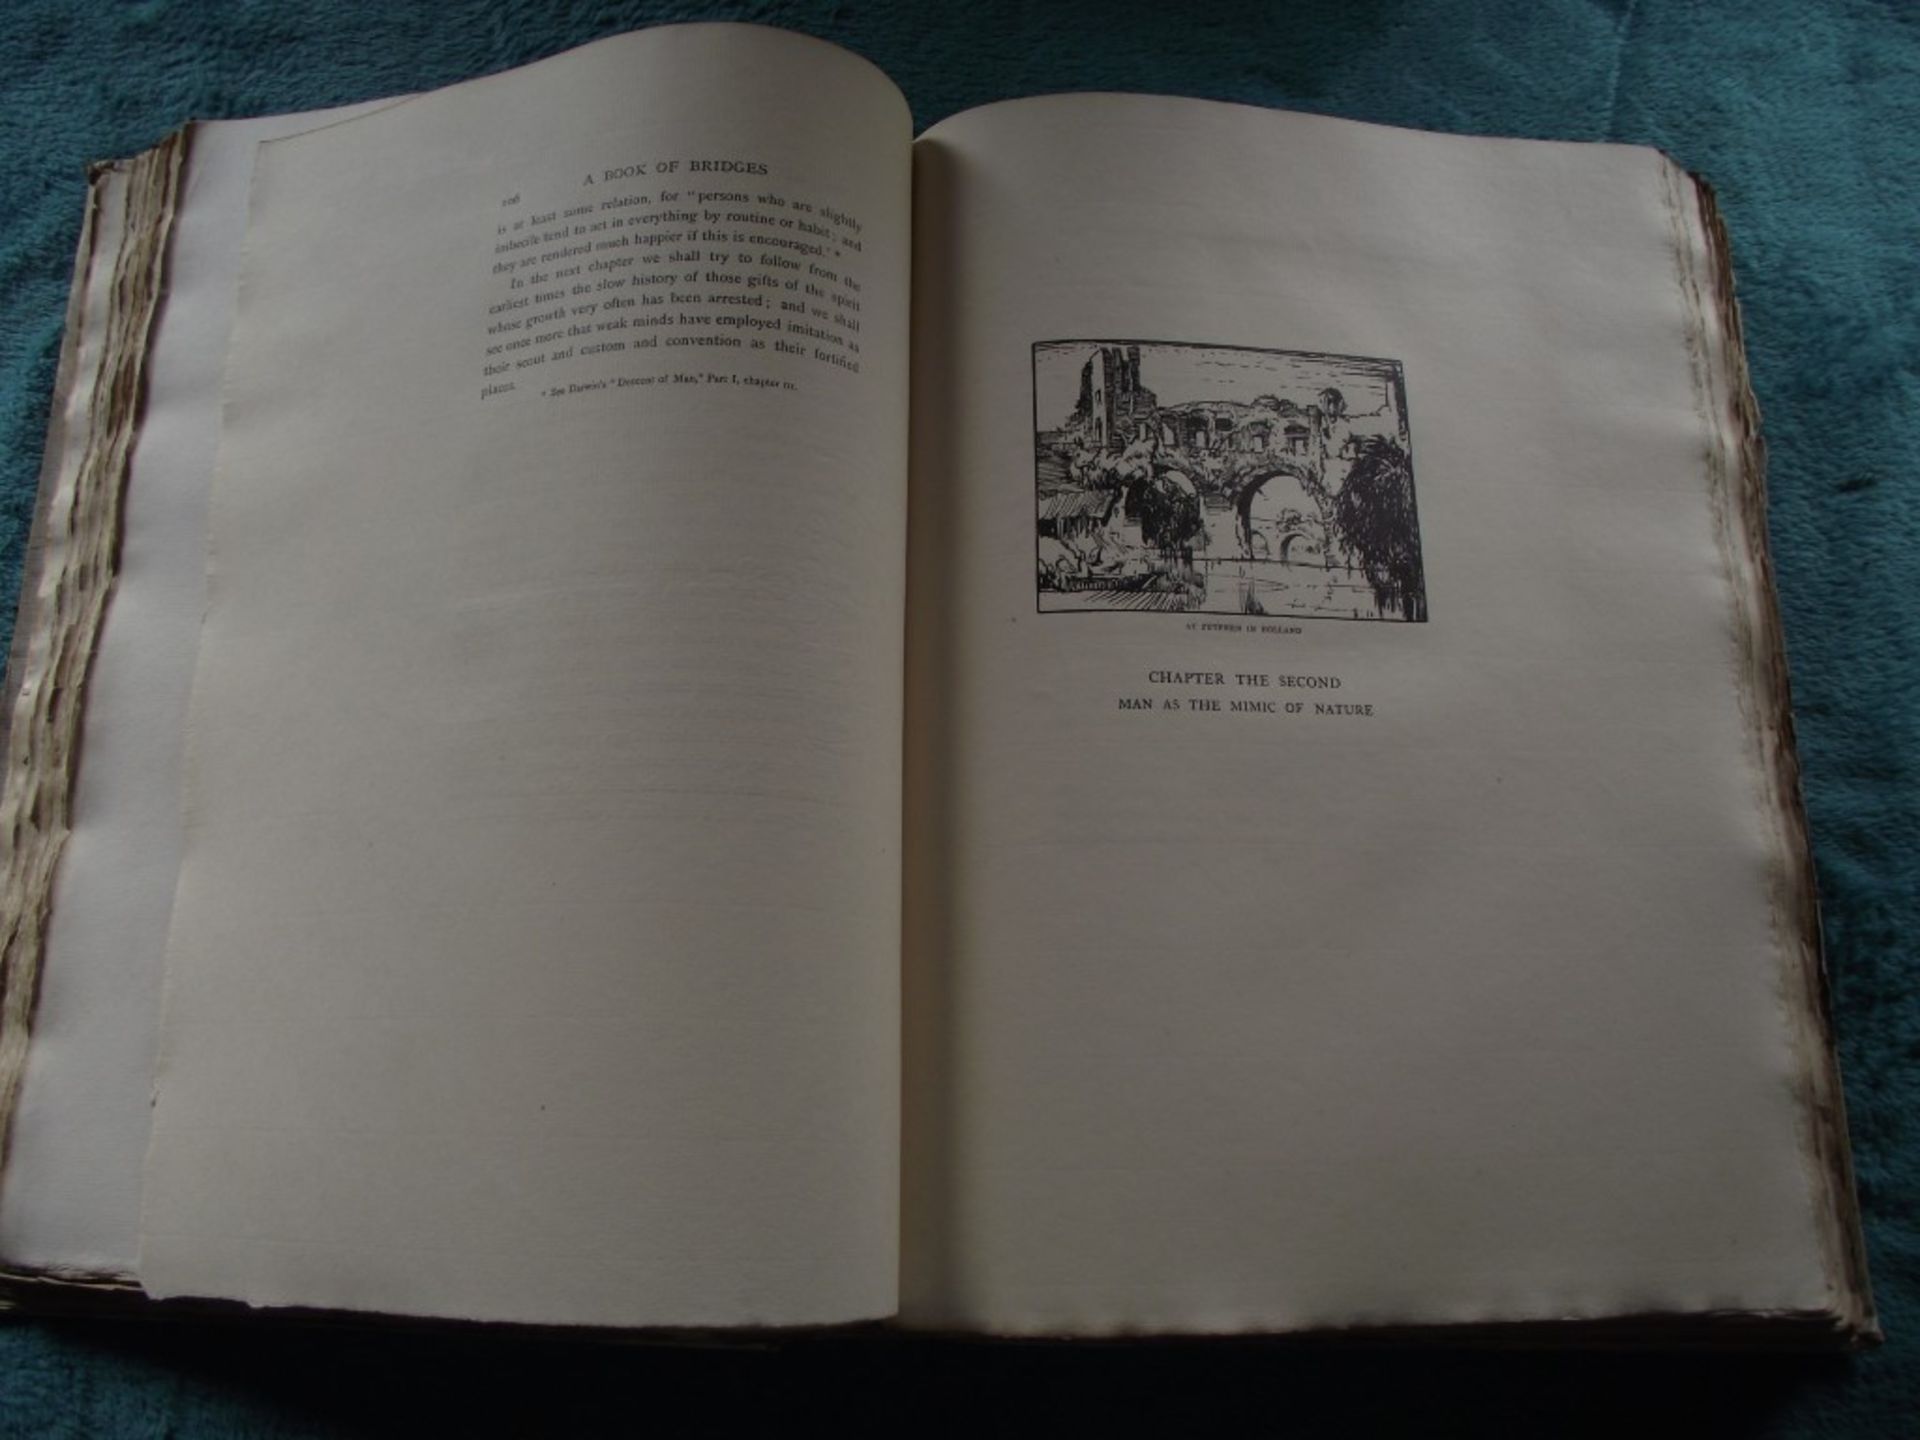 A Book of Bridges by Frank Brangwyn & Walter Shaw Sparrow - Ltd. Edit. 17/75 with Signed Lithograph. - Image 34 of 64